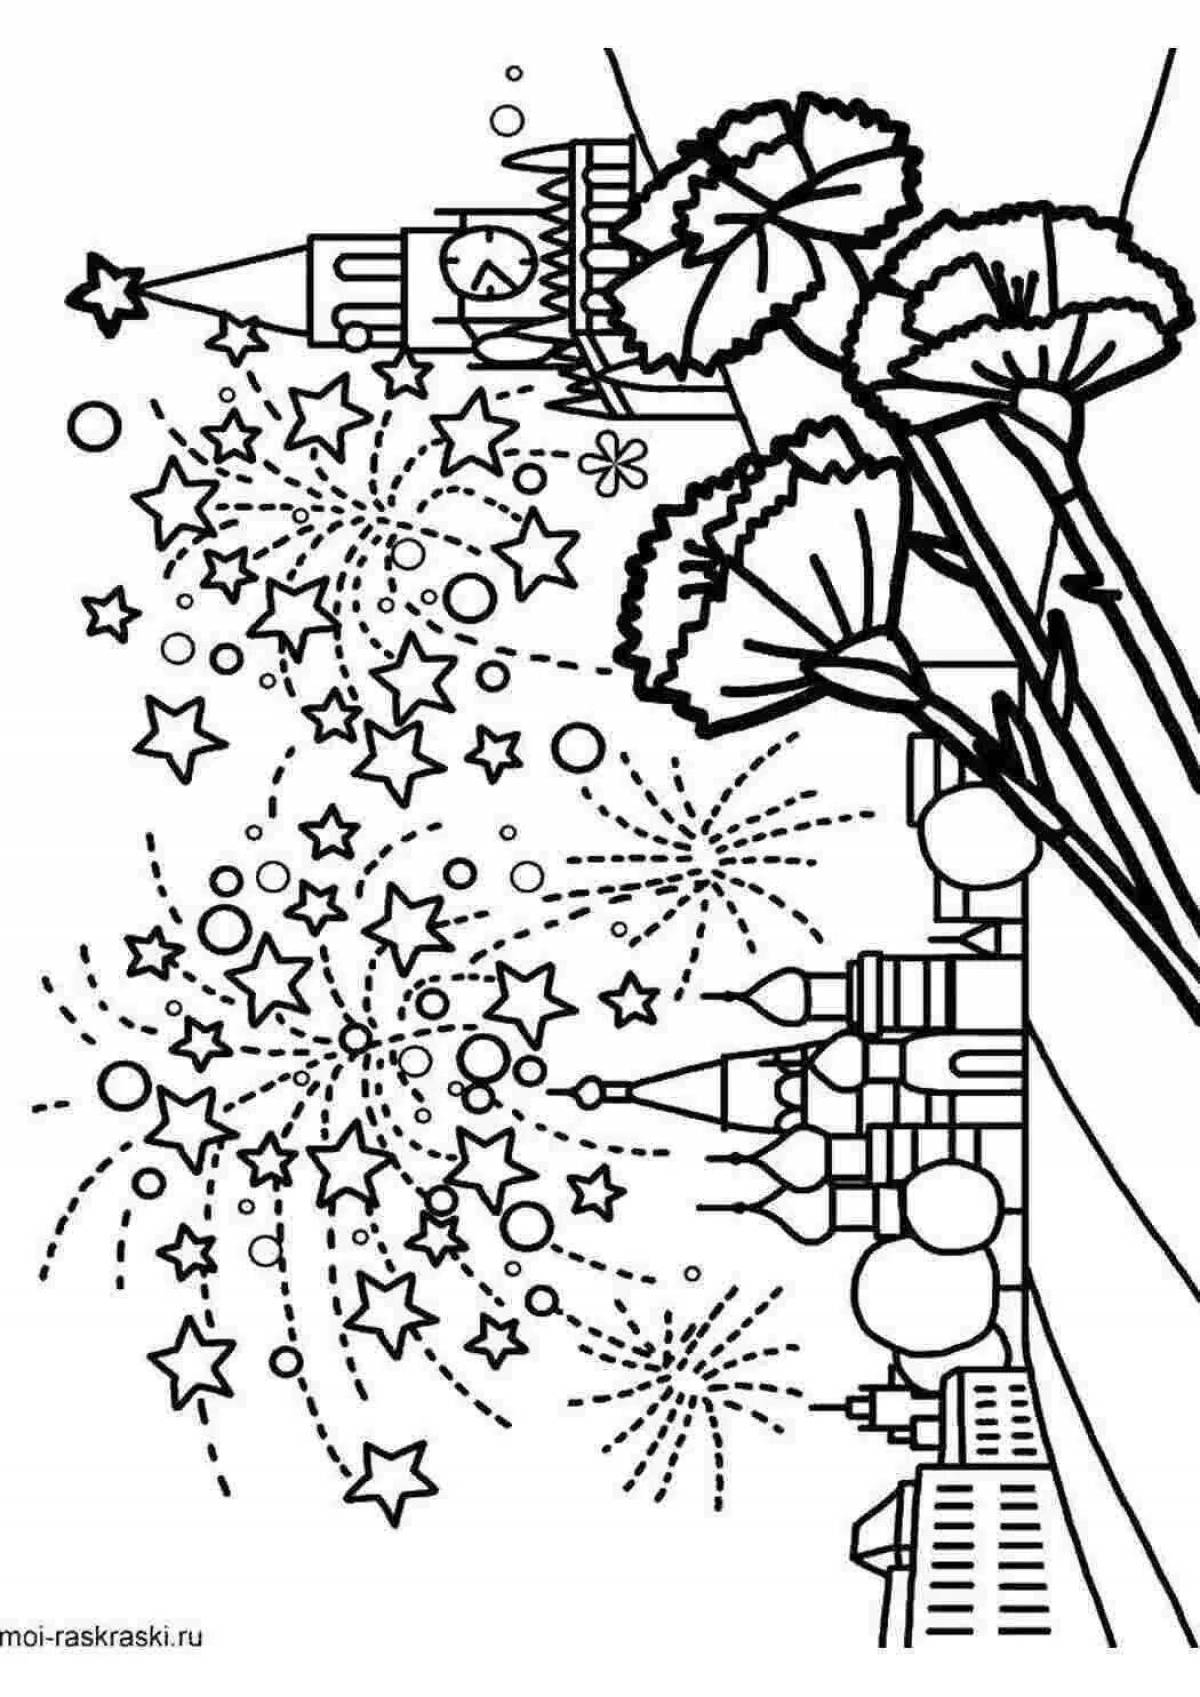 Adorable fireworks coloring book for 3-4 year olds